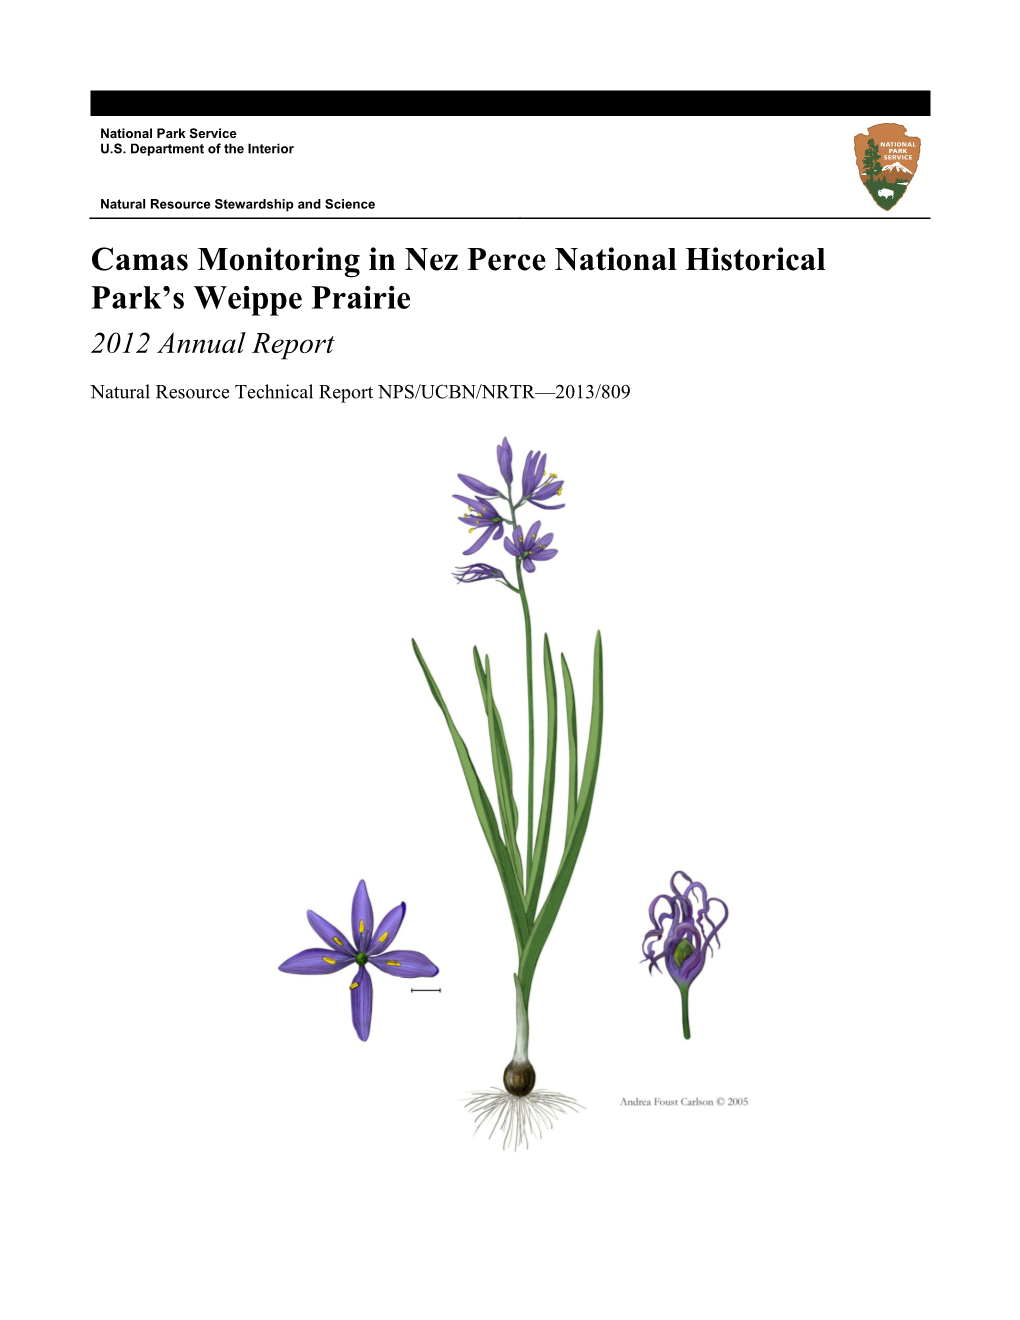 Camas Monitoring in Nez Perce National Historical Park’S Weippe Prairie 2012 Annual Report